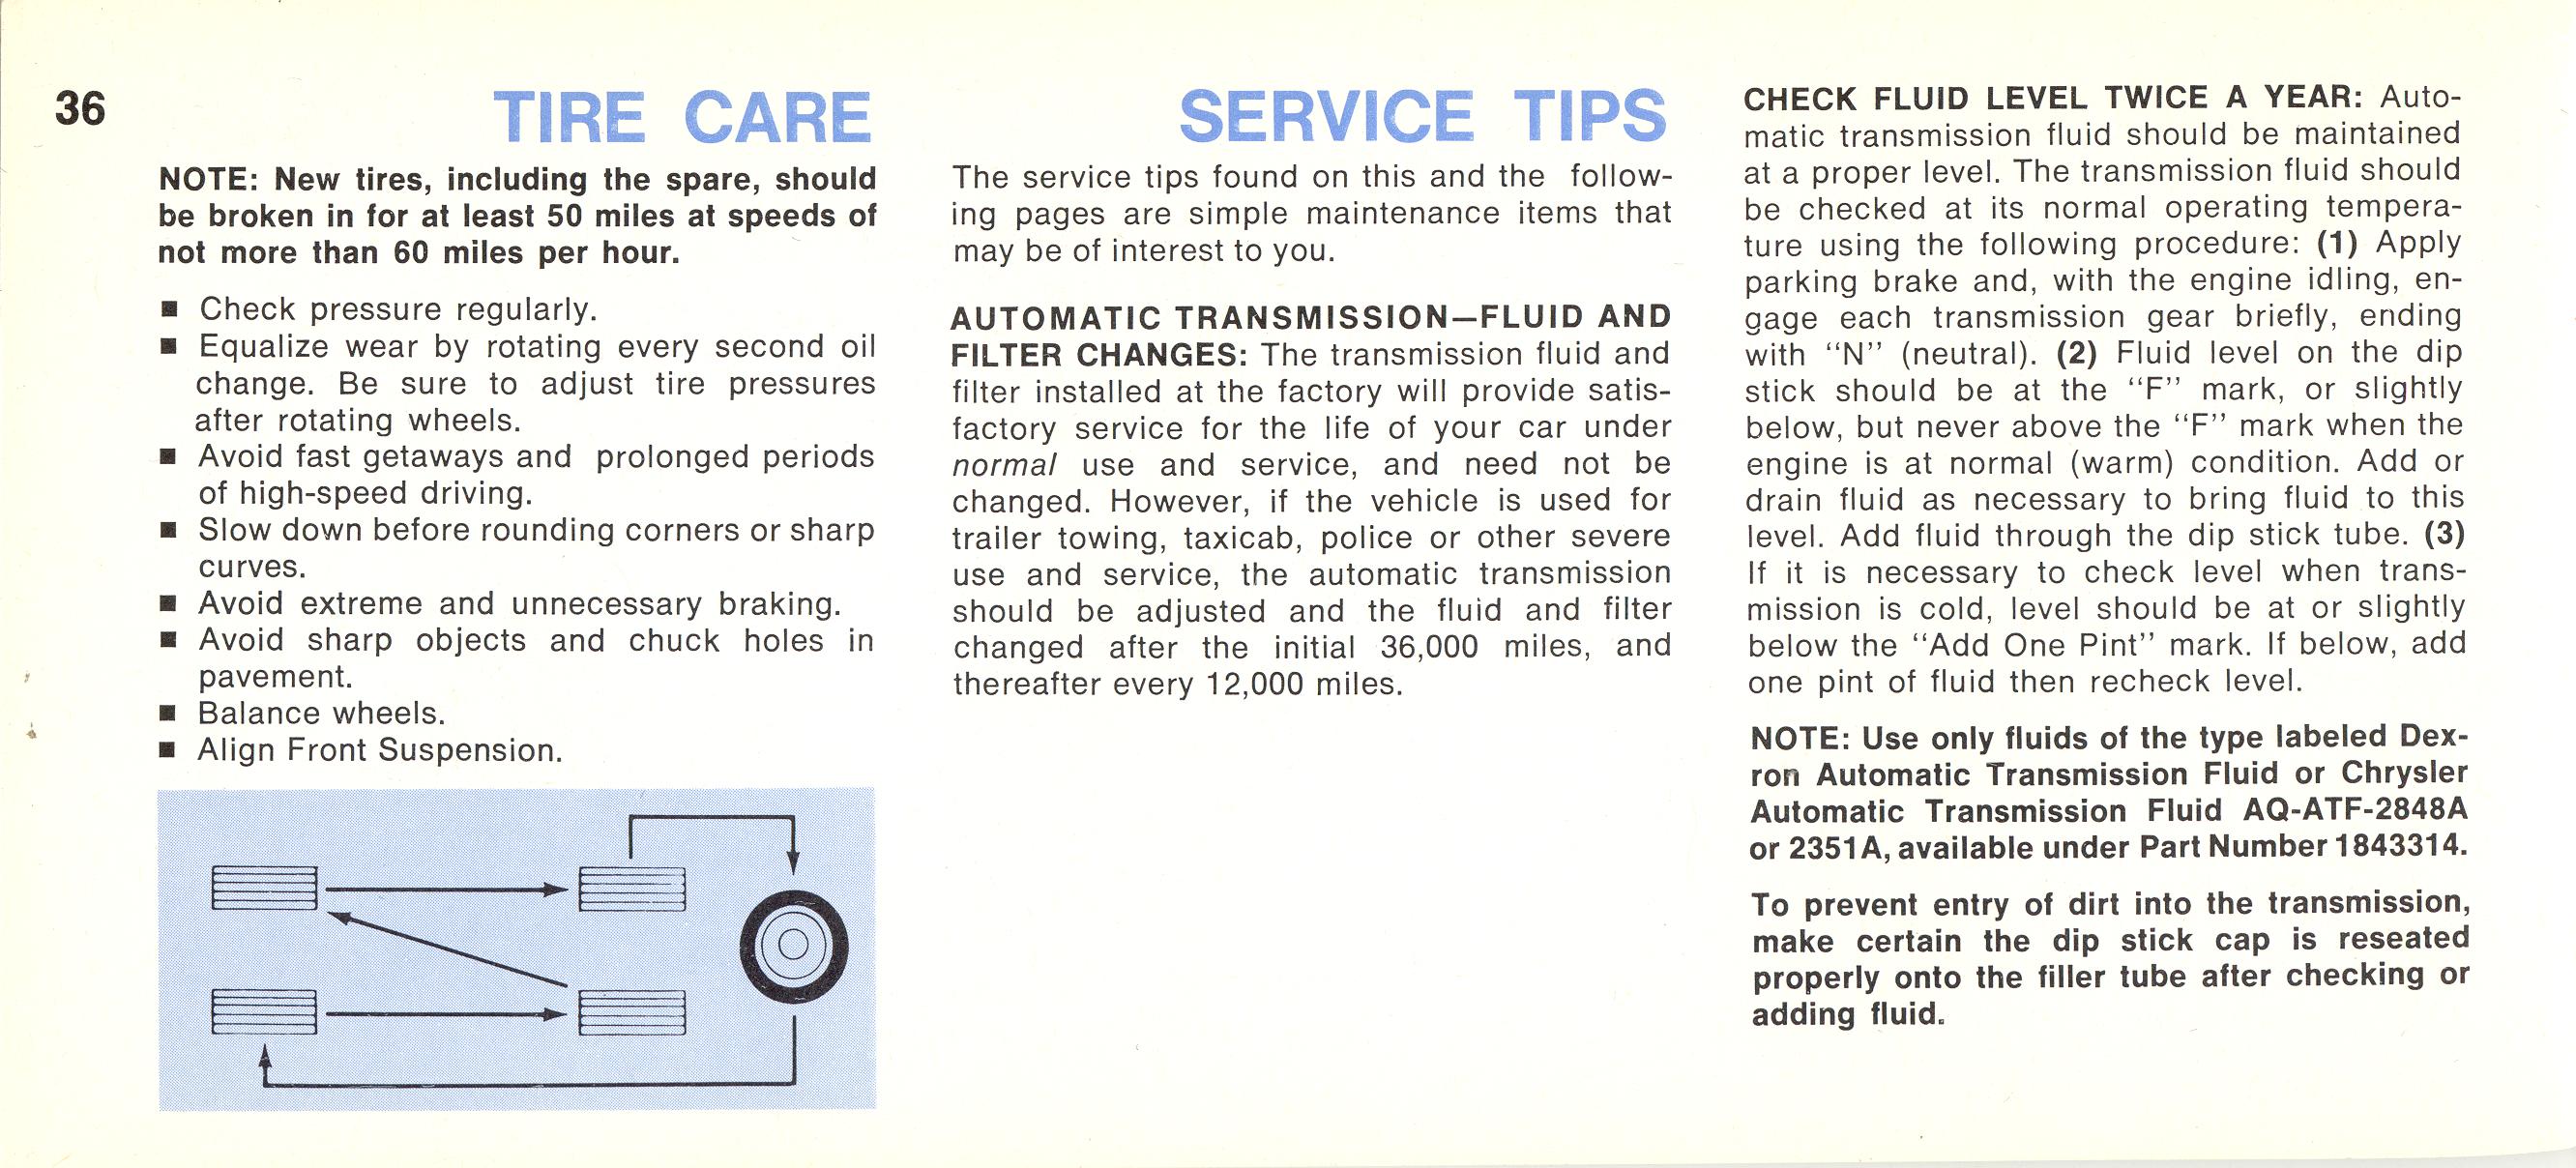 1968 Chrysler Imperial Owners Manual Page 51